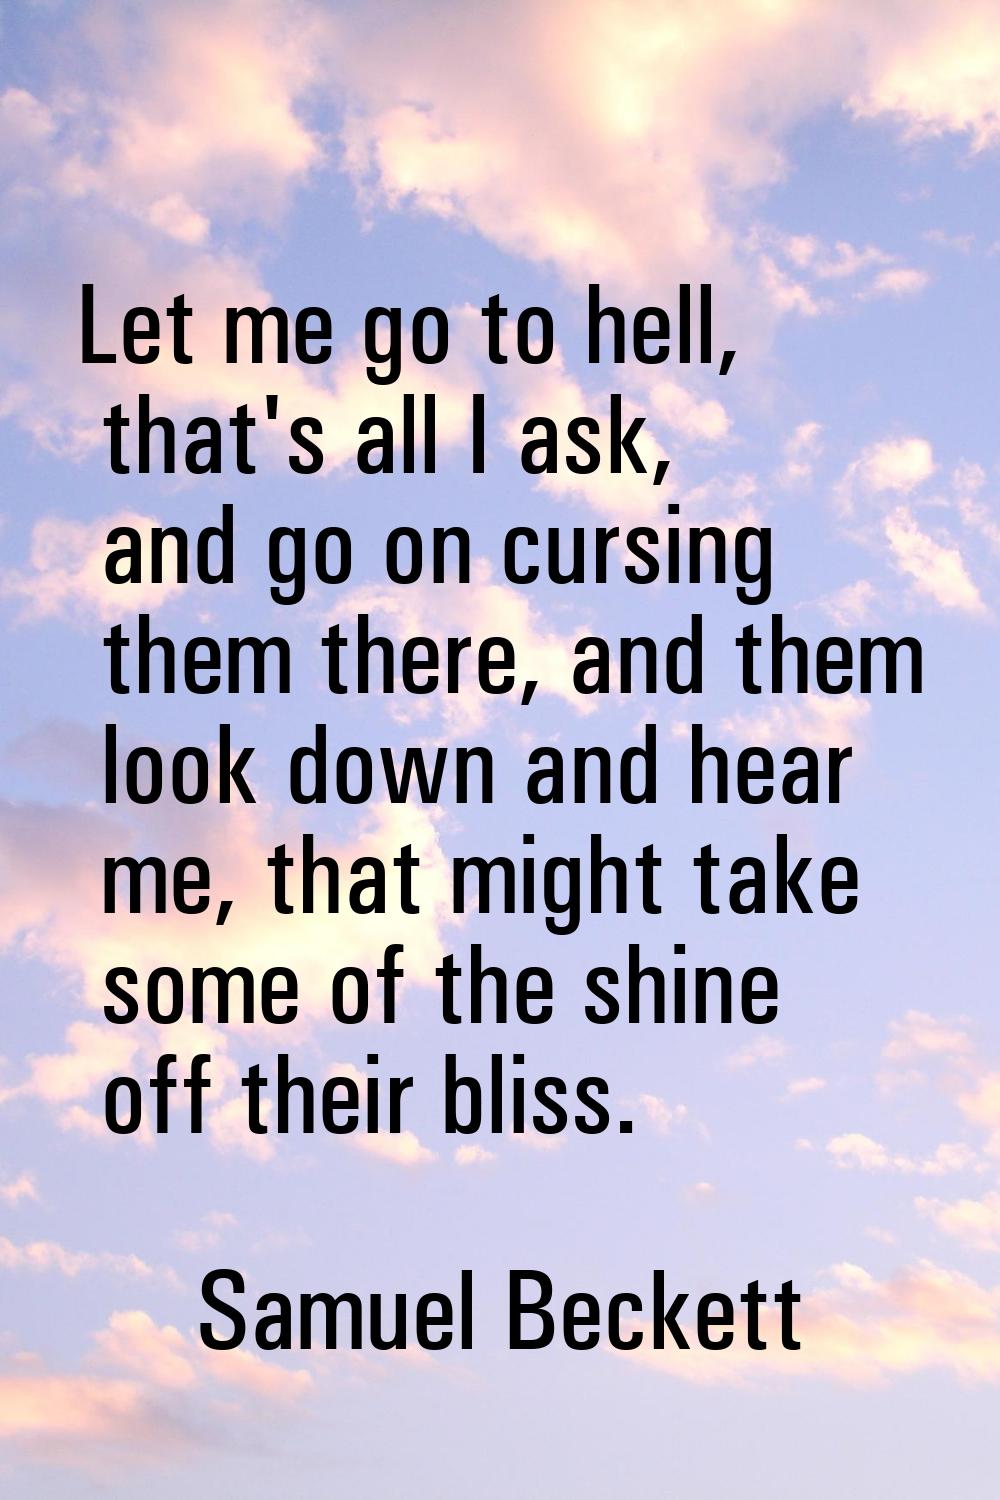 Let me go to hell, that's all I ask, and go on cursing them there, and them look down and hear me, 